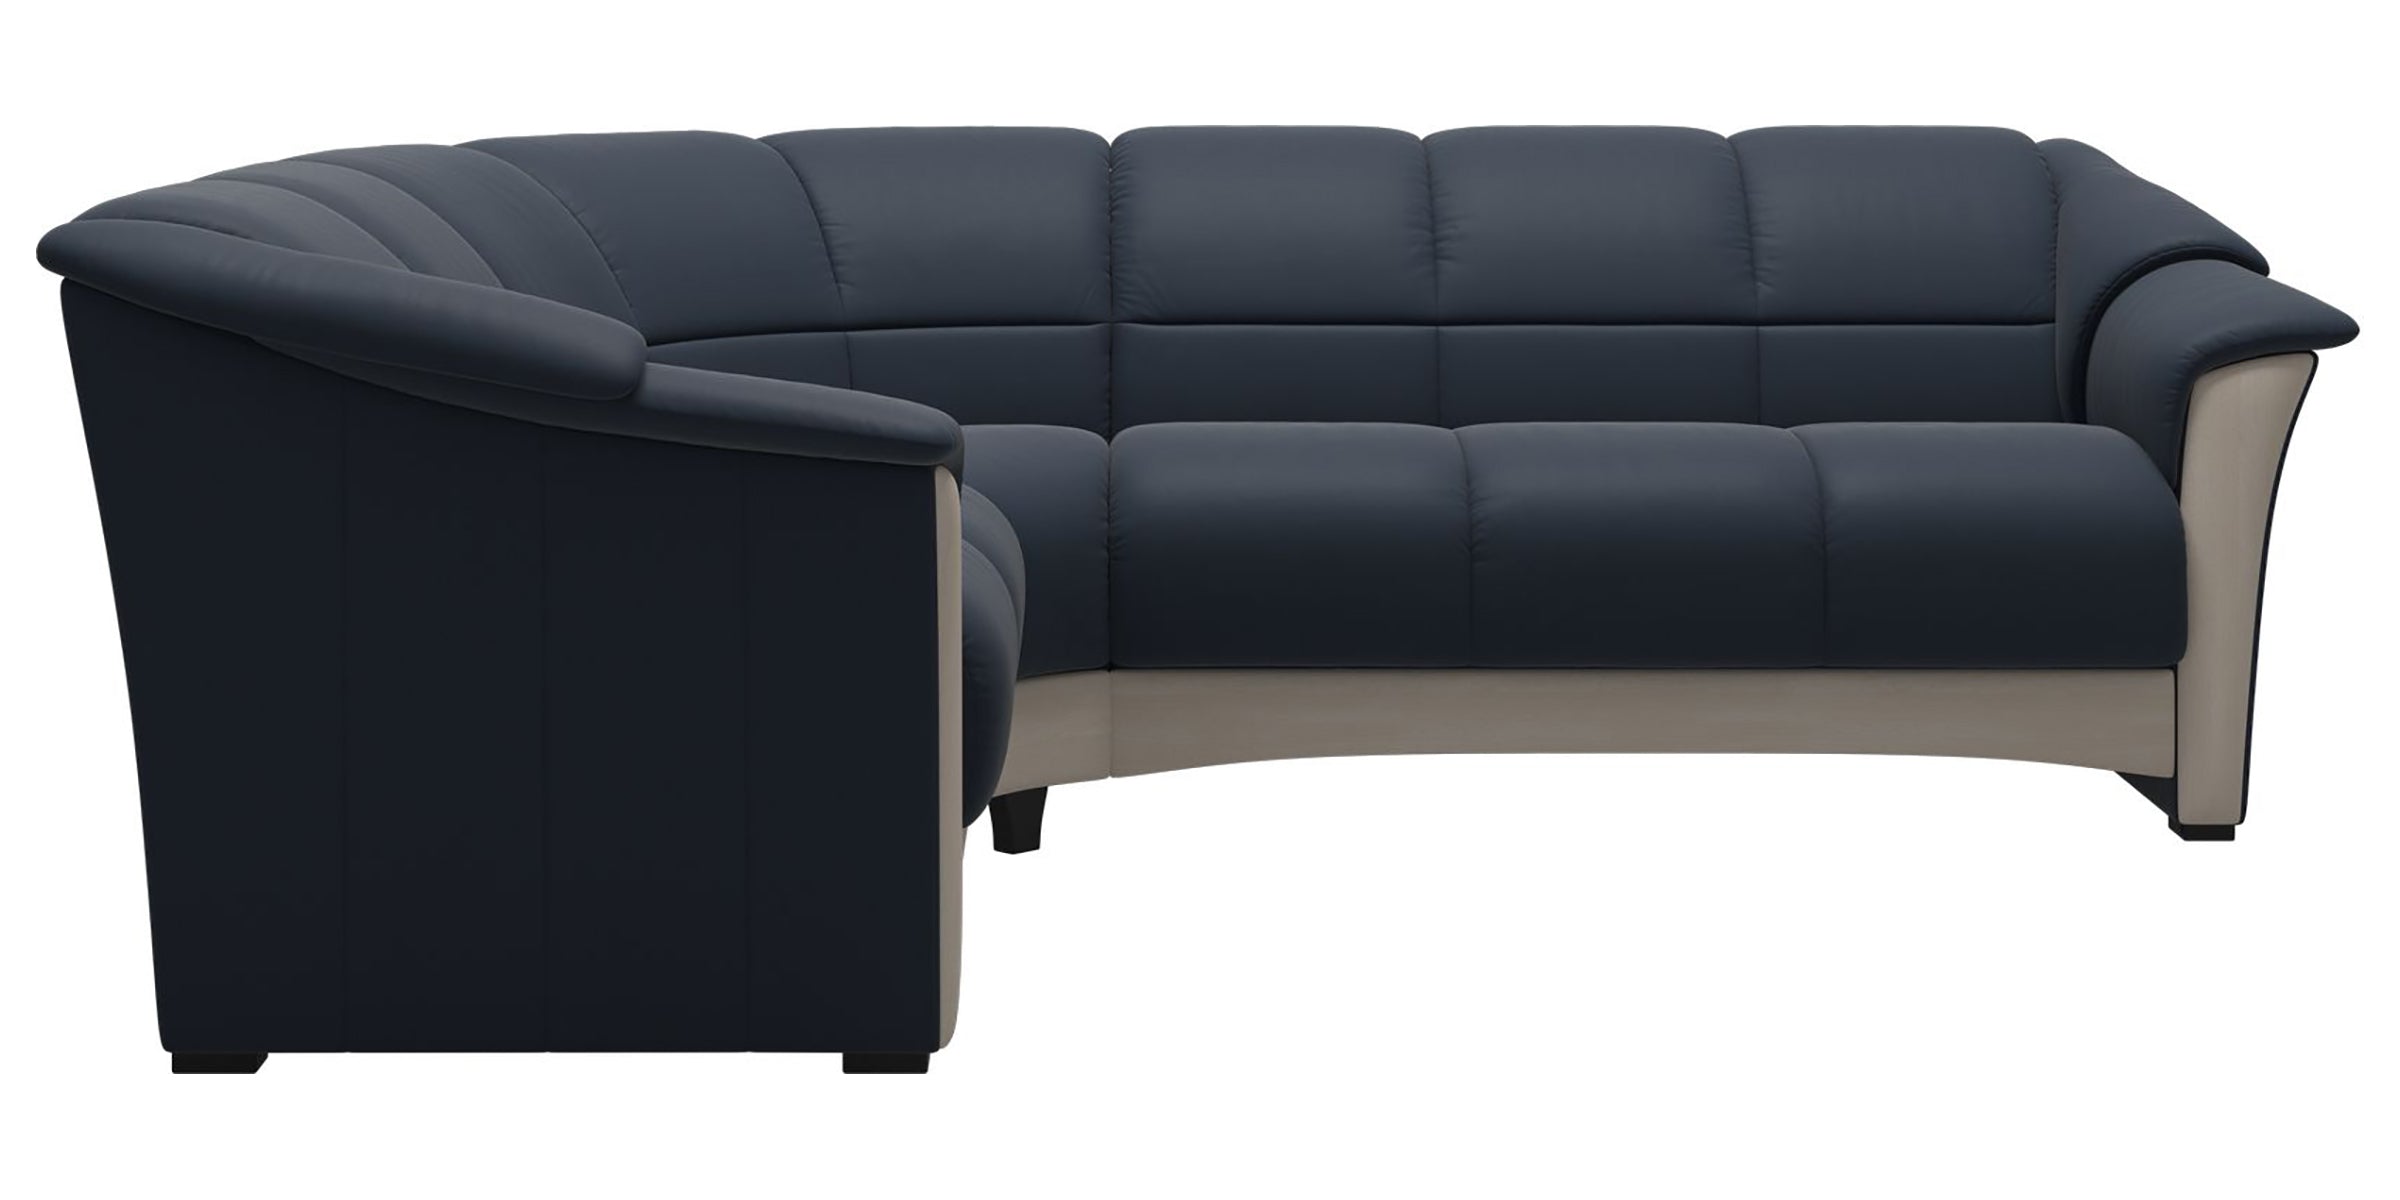 Paloma Leather Oxford Blue and Whitewash Base | Stressless Oslo Sectional | Valley Ridge Furniture